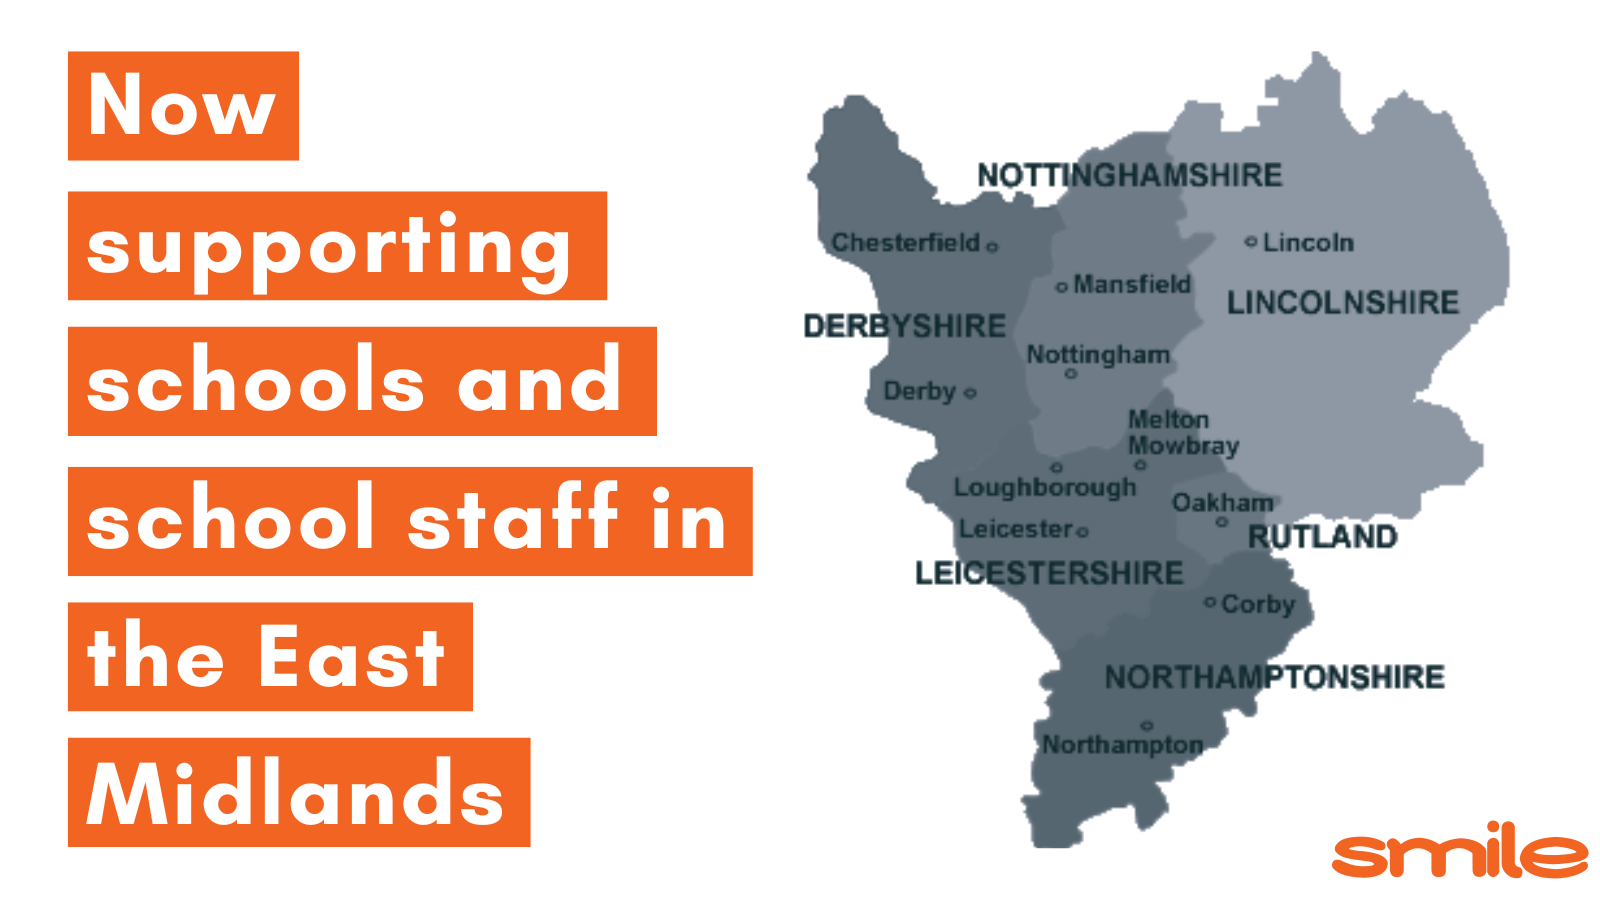 Now supporting schools and school staff in the East Midlands